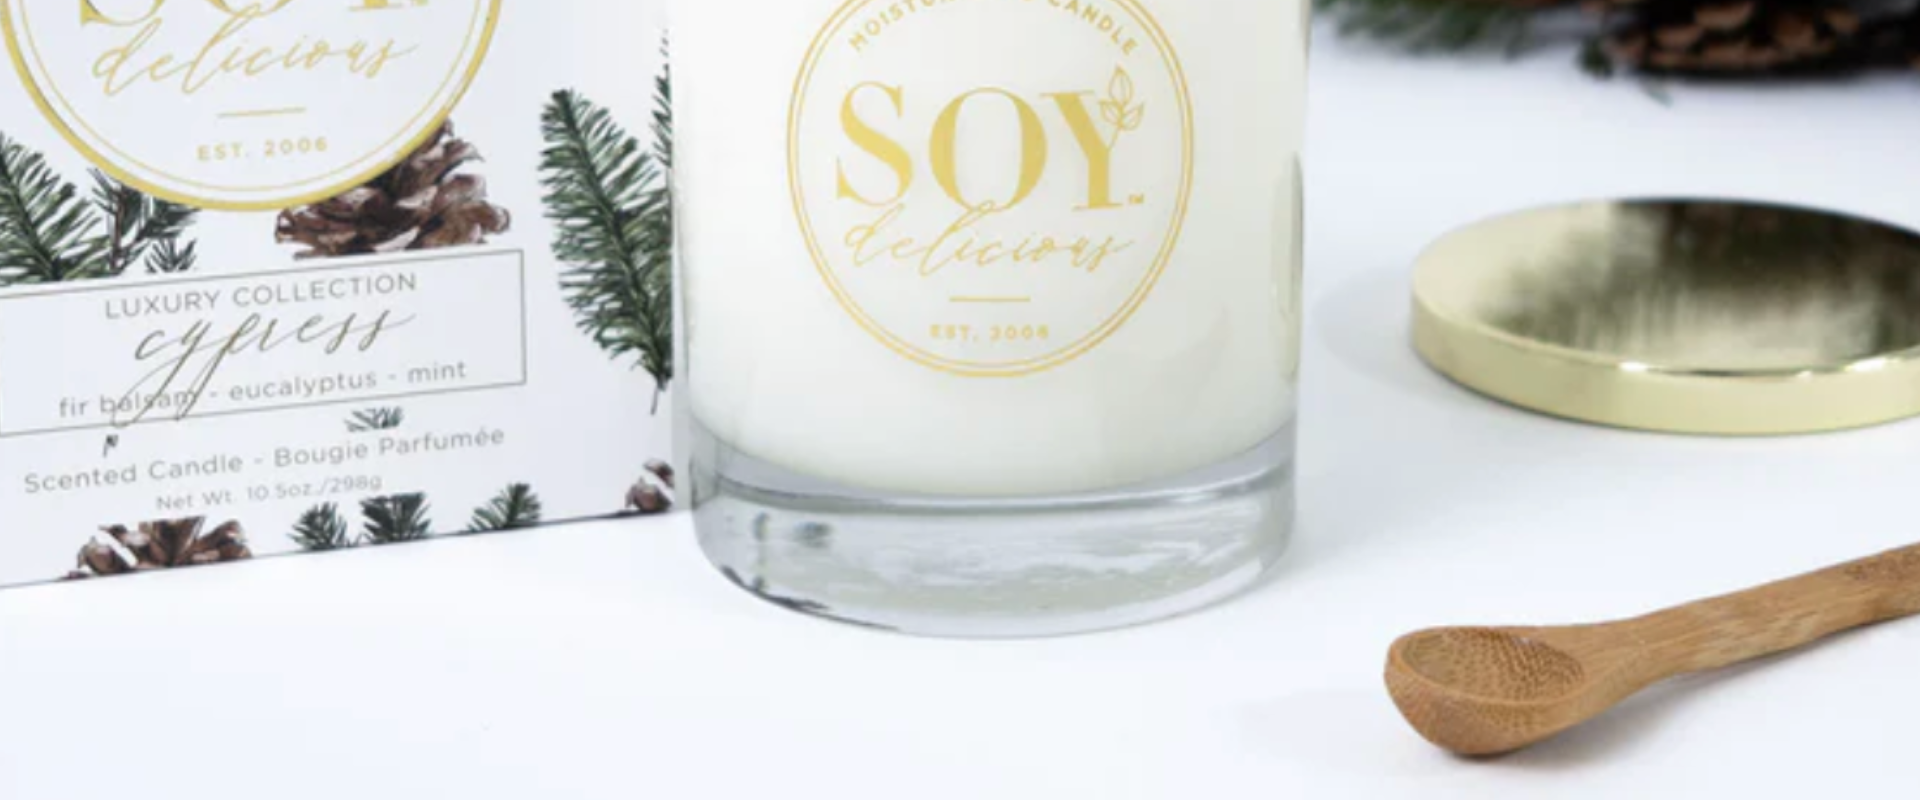 Cotton Wicks: Why They're The Best Wick To Use For A Candle – Soy Delicious  Candles